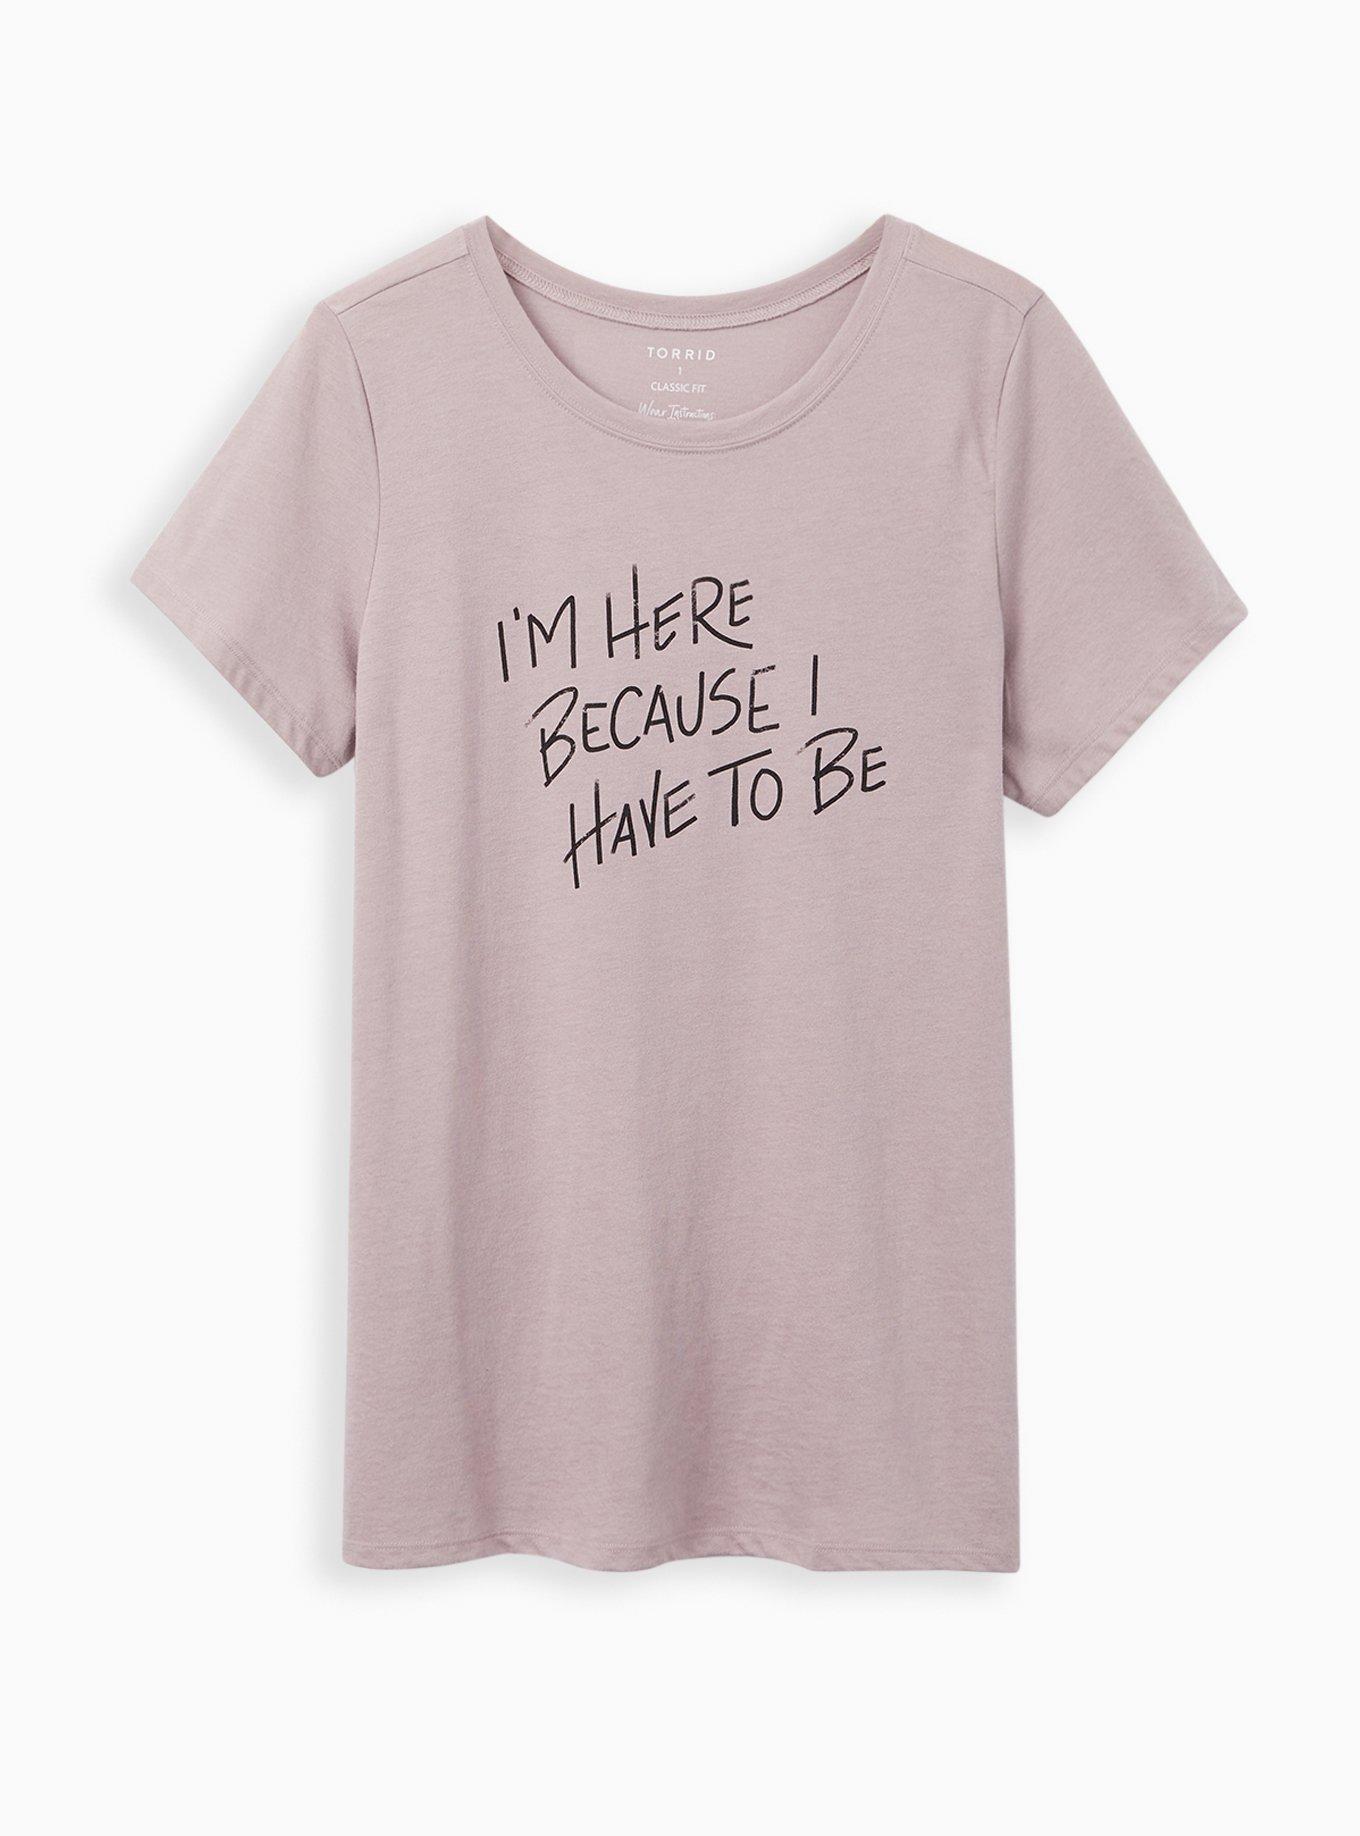 Plus Size - Everyday Tee - Signature Jersey Here Because Purple - Torrid